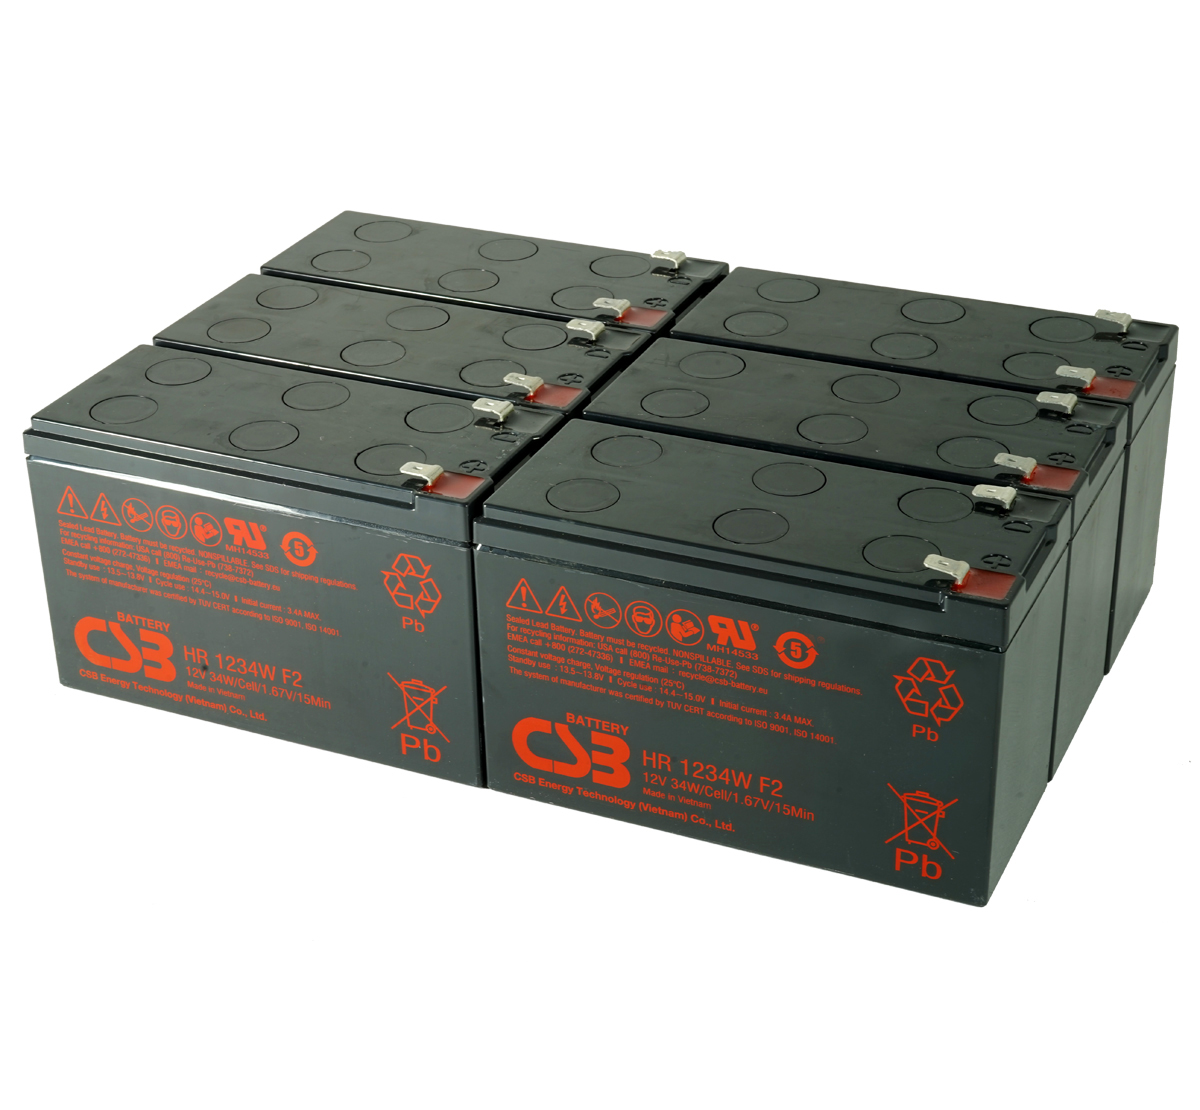 MDS1012 UPS Battery Kit for MGE AB1012